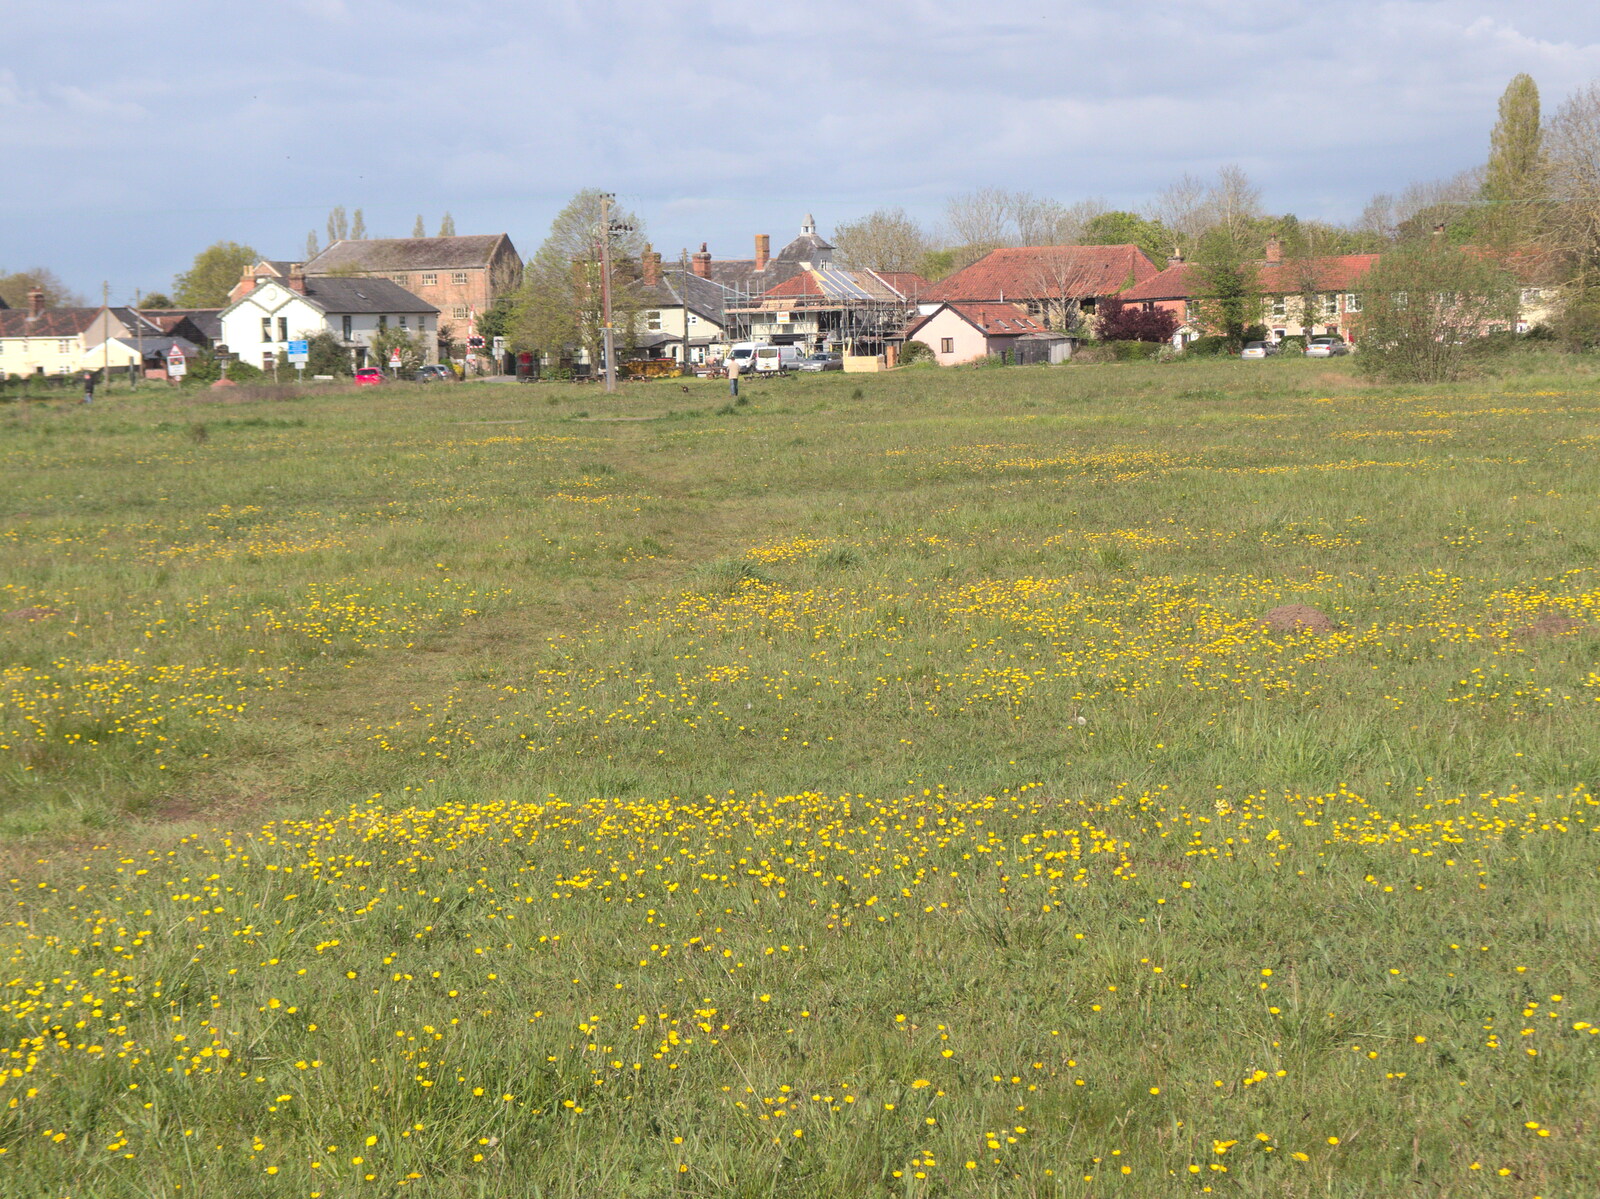 Mellis Common, looking towards the railway from The BSCC at the King's Head, Brockdish, Norfolk - 13th May 2021